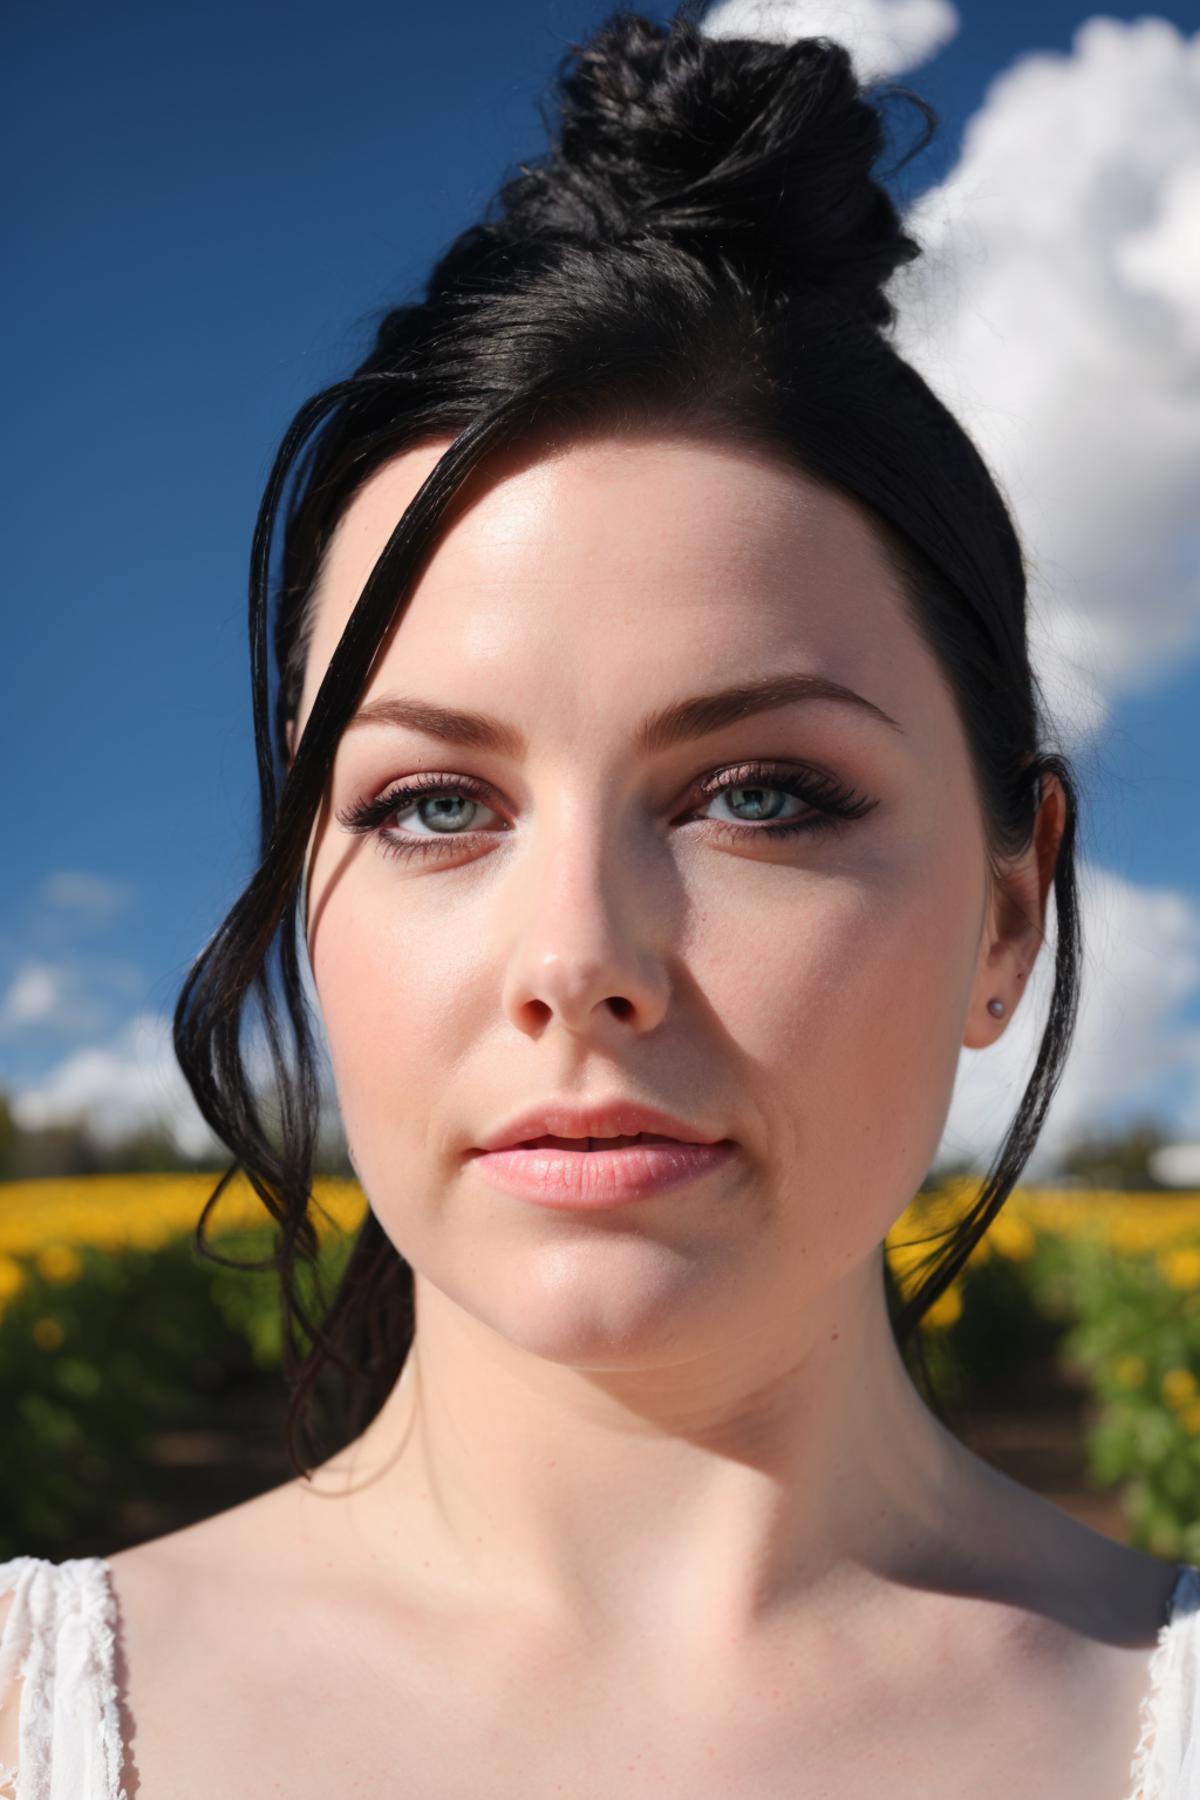 Amy Lee image by headupdef